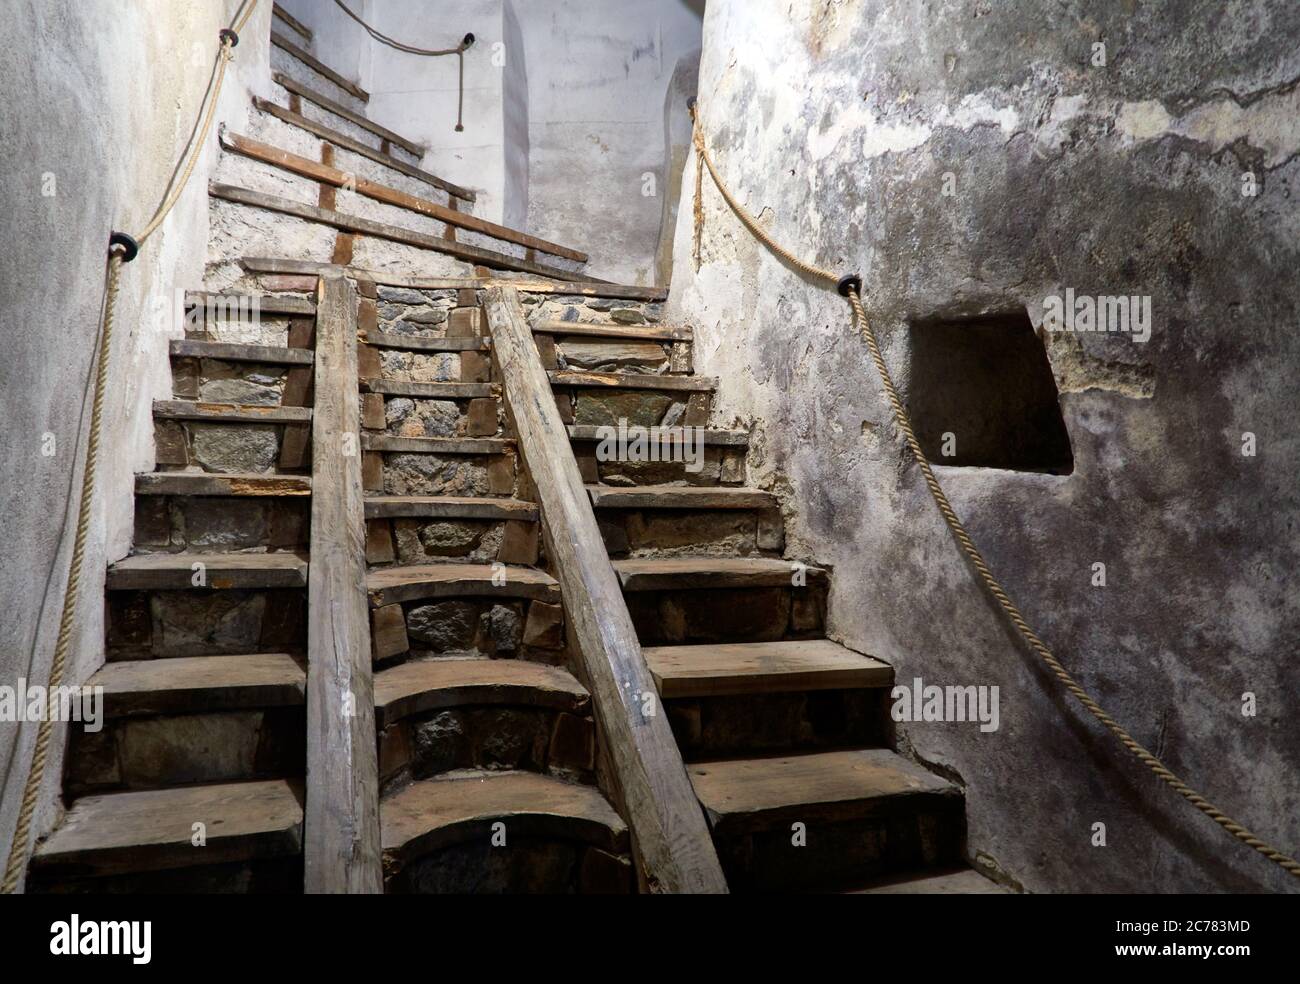 Poland, Czocha village, Luba&#x144, County, Lower Silesian    the typical staircase of the cellar of the castle specially adapted for the transport of wine barrelsThe Czocha castle  is a defensive castle in the village of Czocha, Origin of the stone castle dates back to 1329. Stock Photo